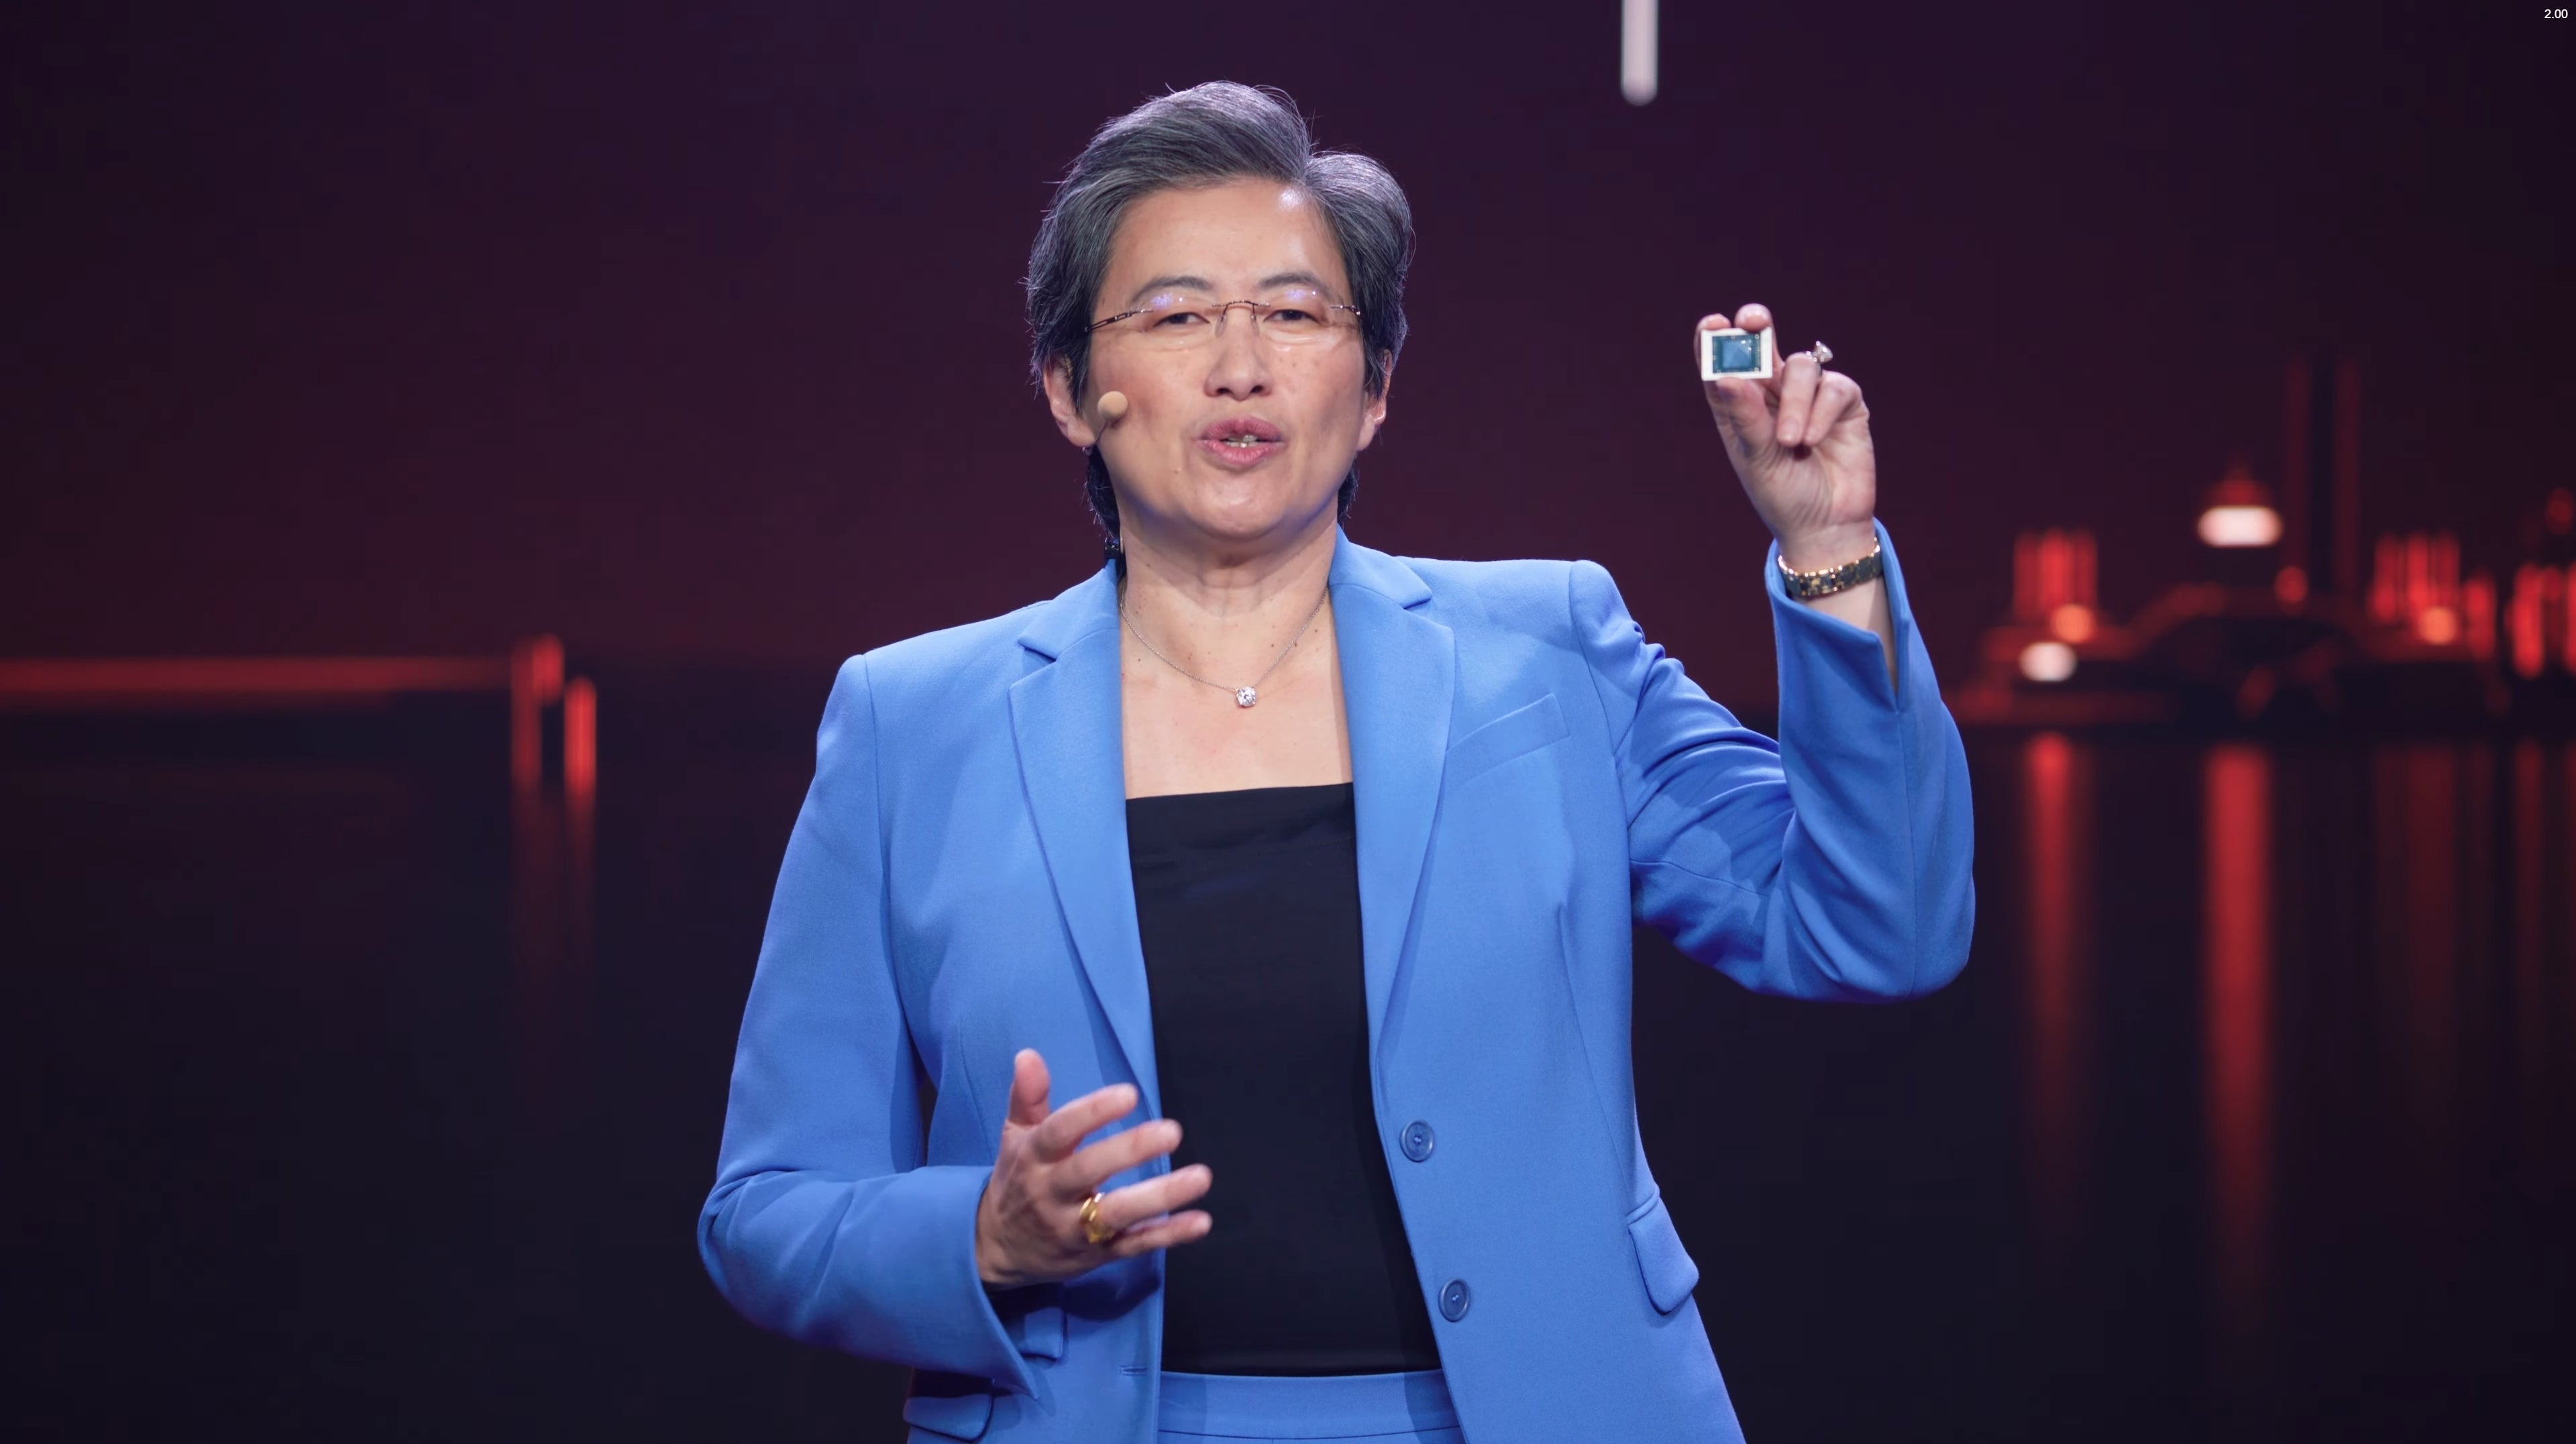 AMD at CES 2021: Ryzen 5000 processors for laptops announced